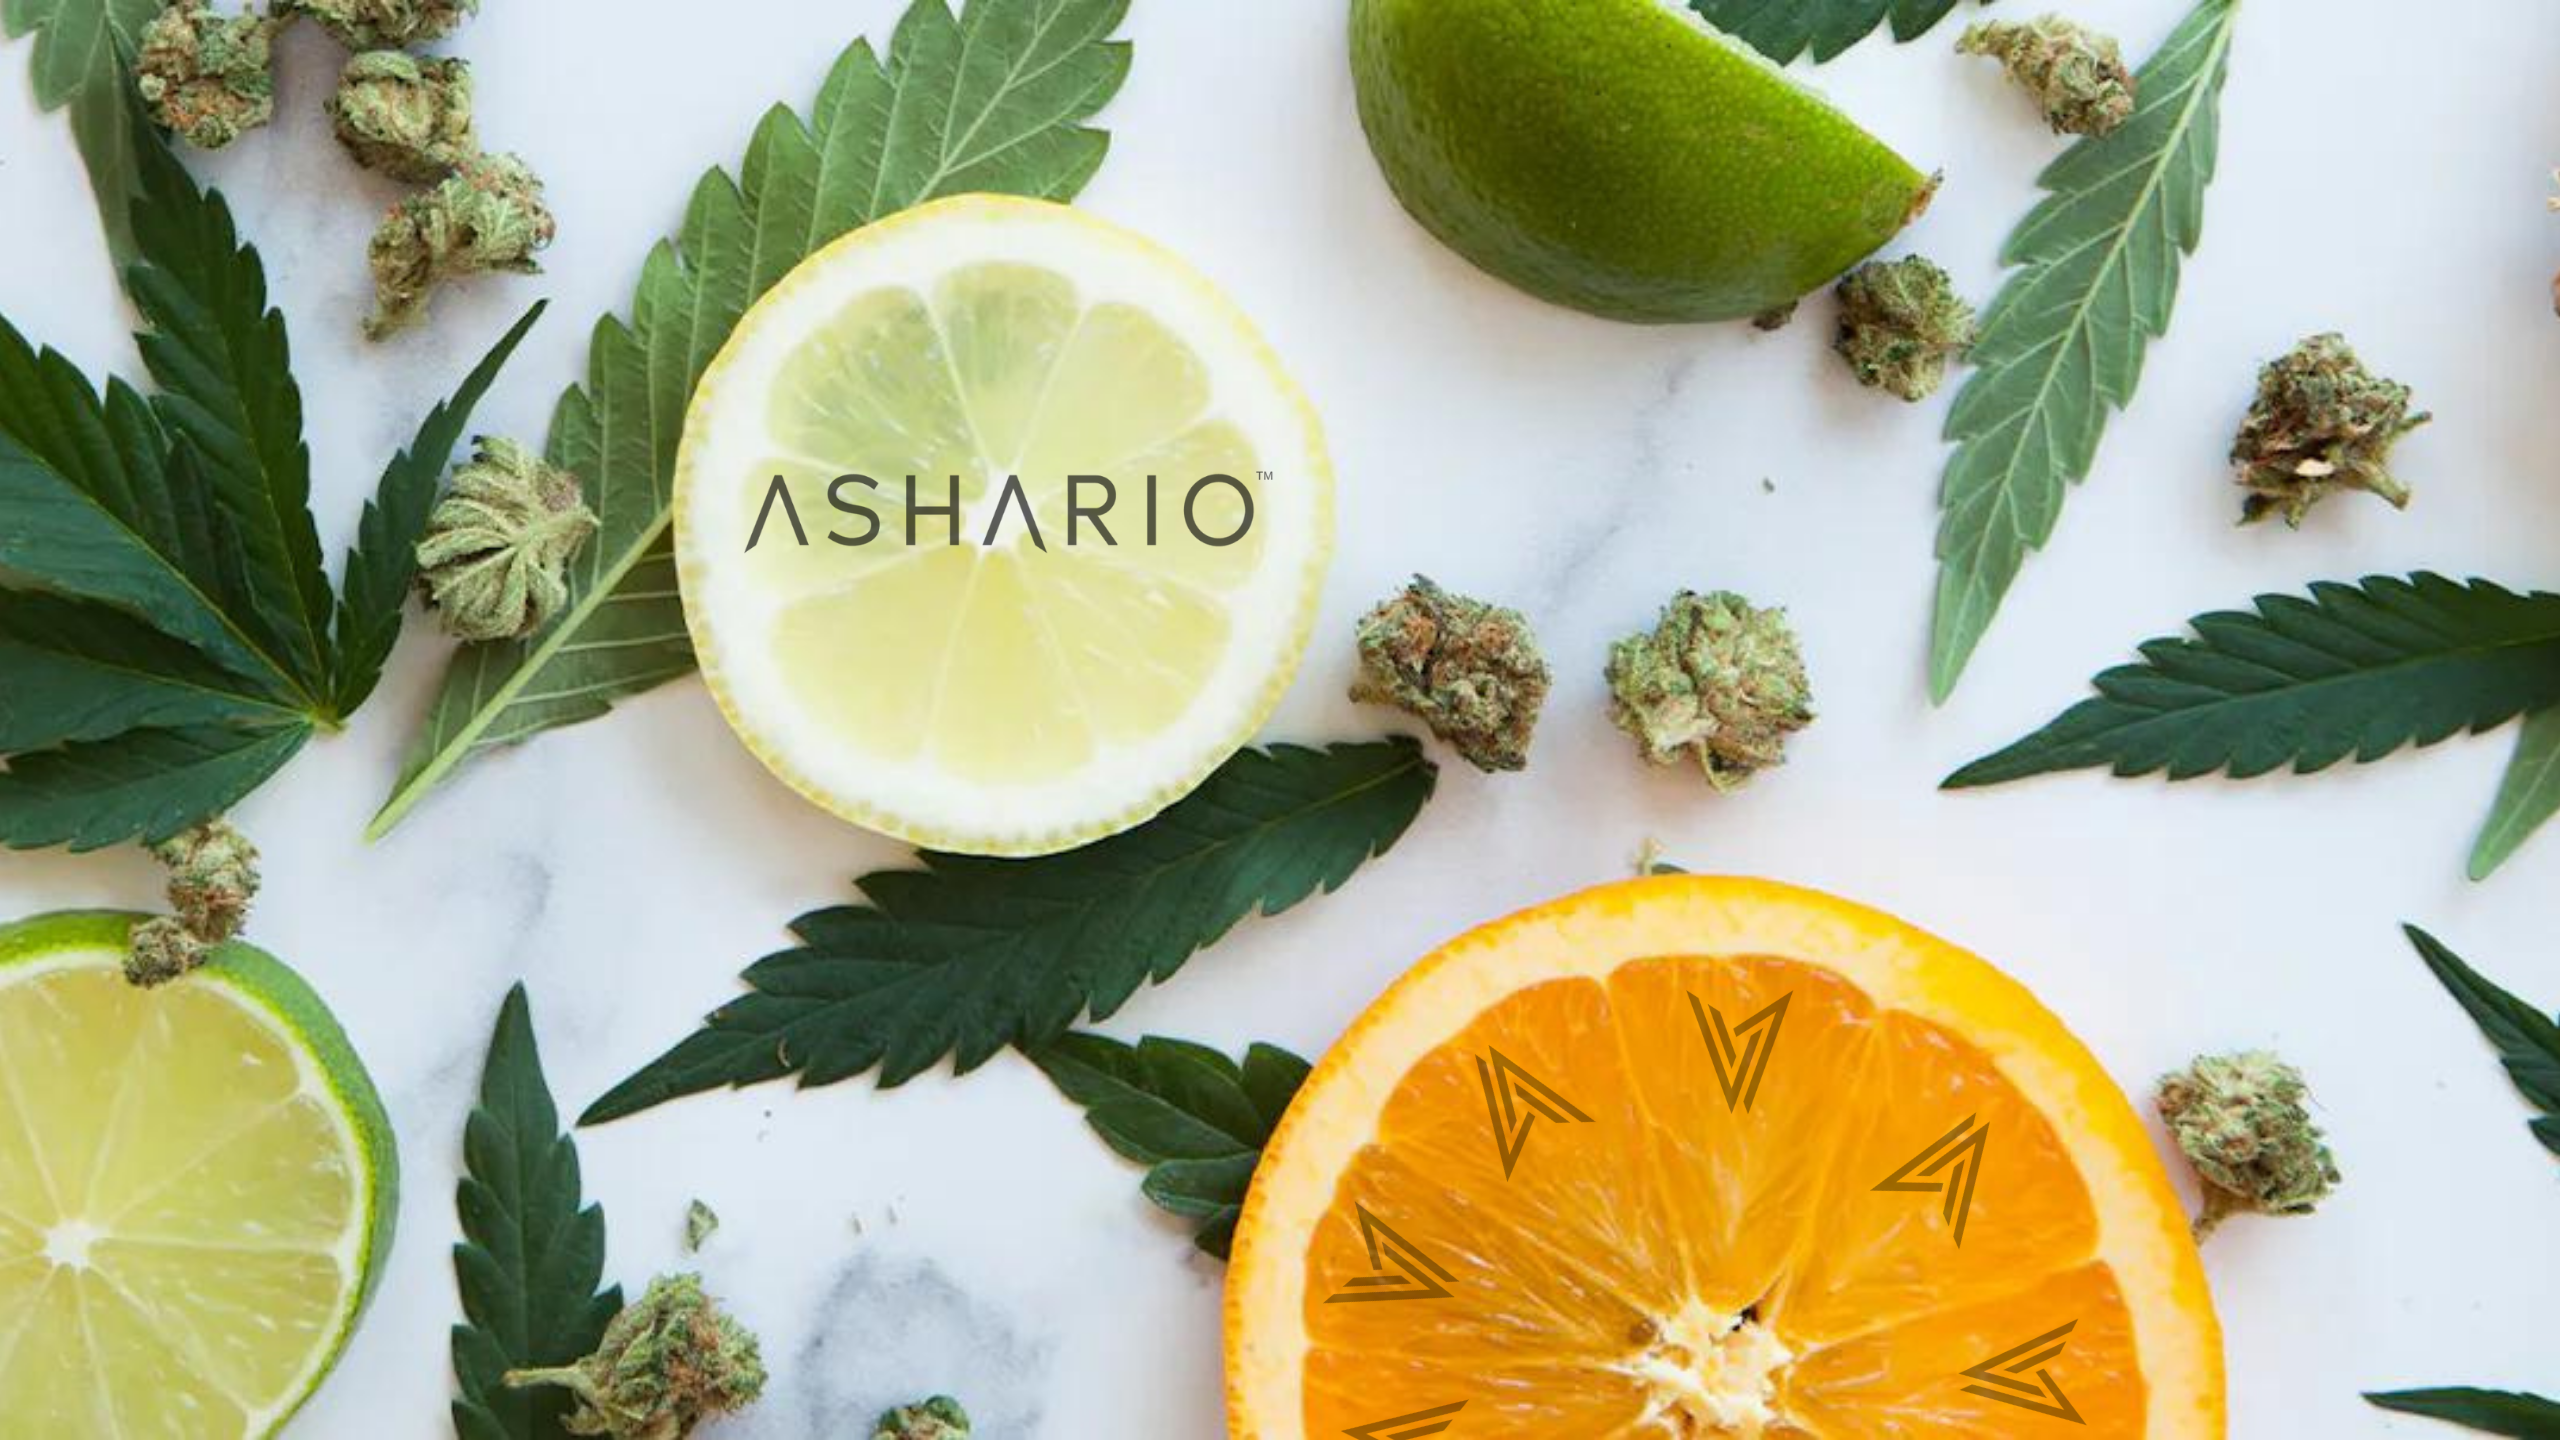 Join us as we explore the zesty world of limonene with Ashario Cannabis. Delve into the bright and invigorating aroma of this citrus terpene and discover its potential benefits for both body and mind.